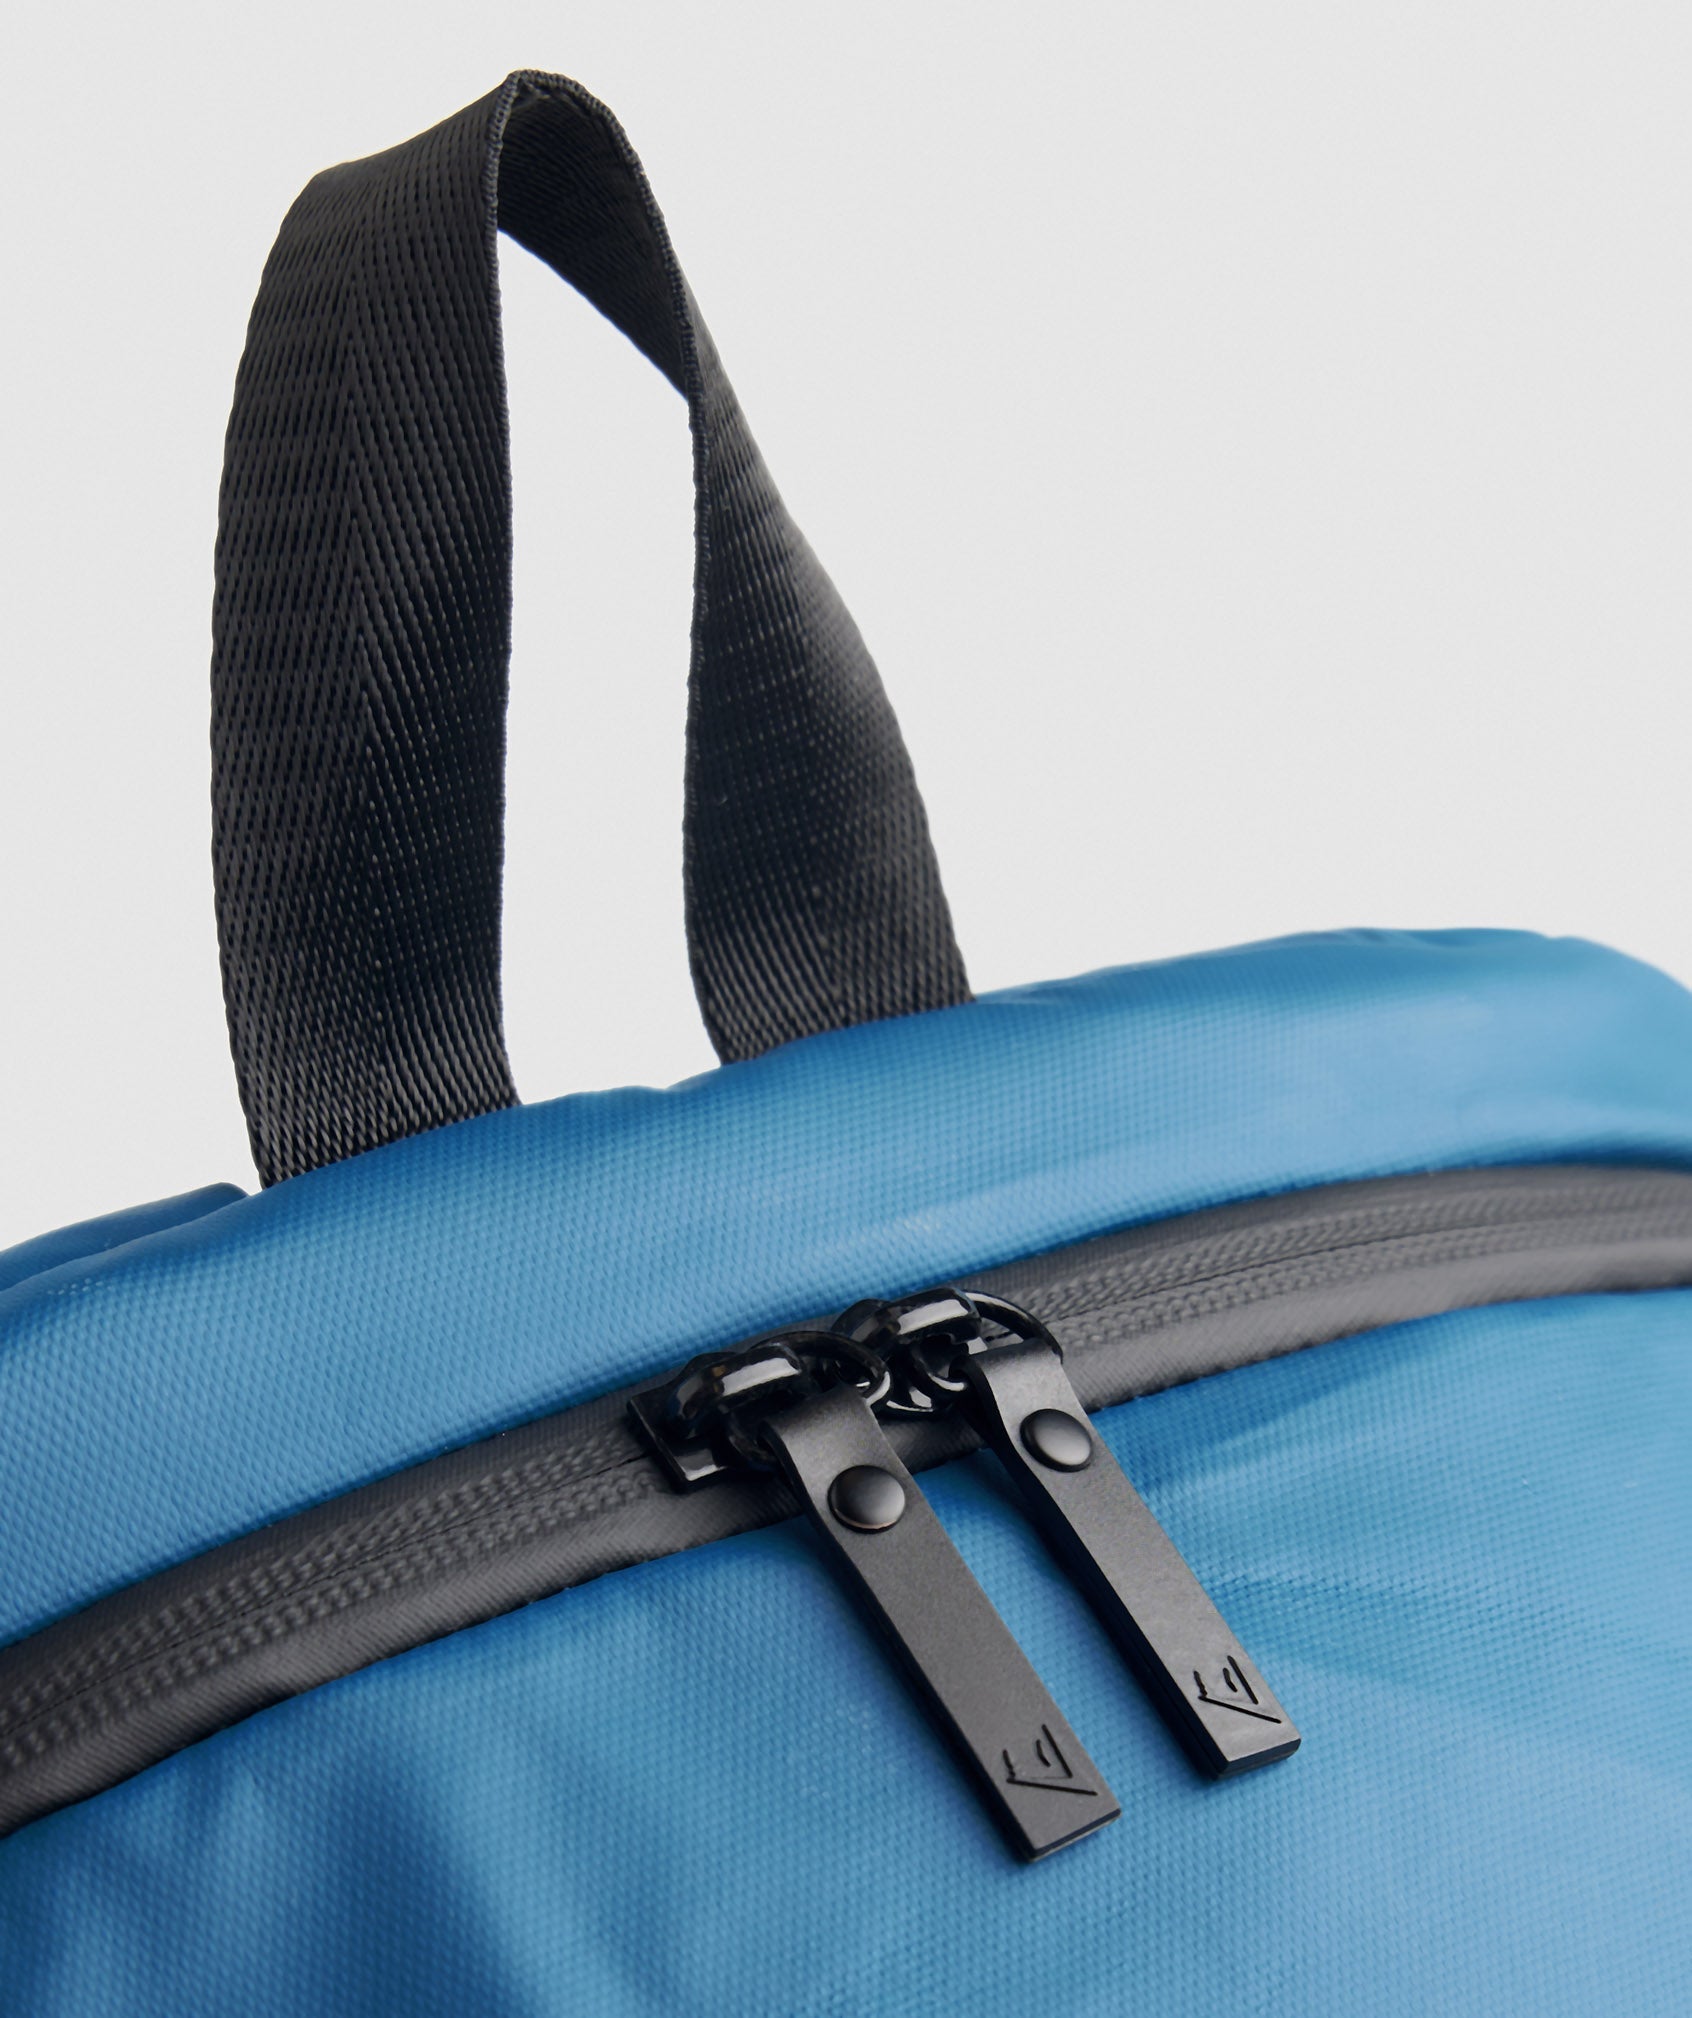 X-Series 0.1 Backpack in Lakeside Blue - view 3